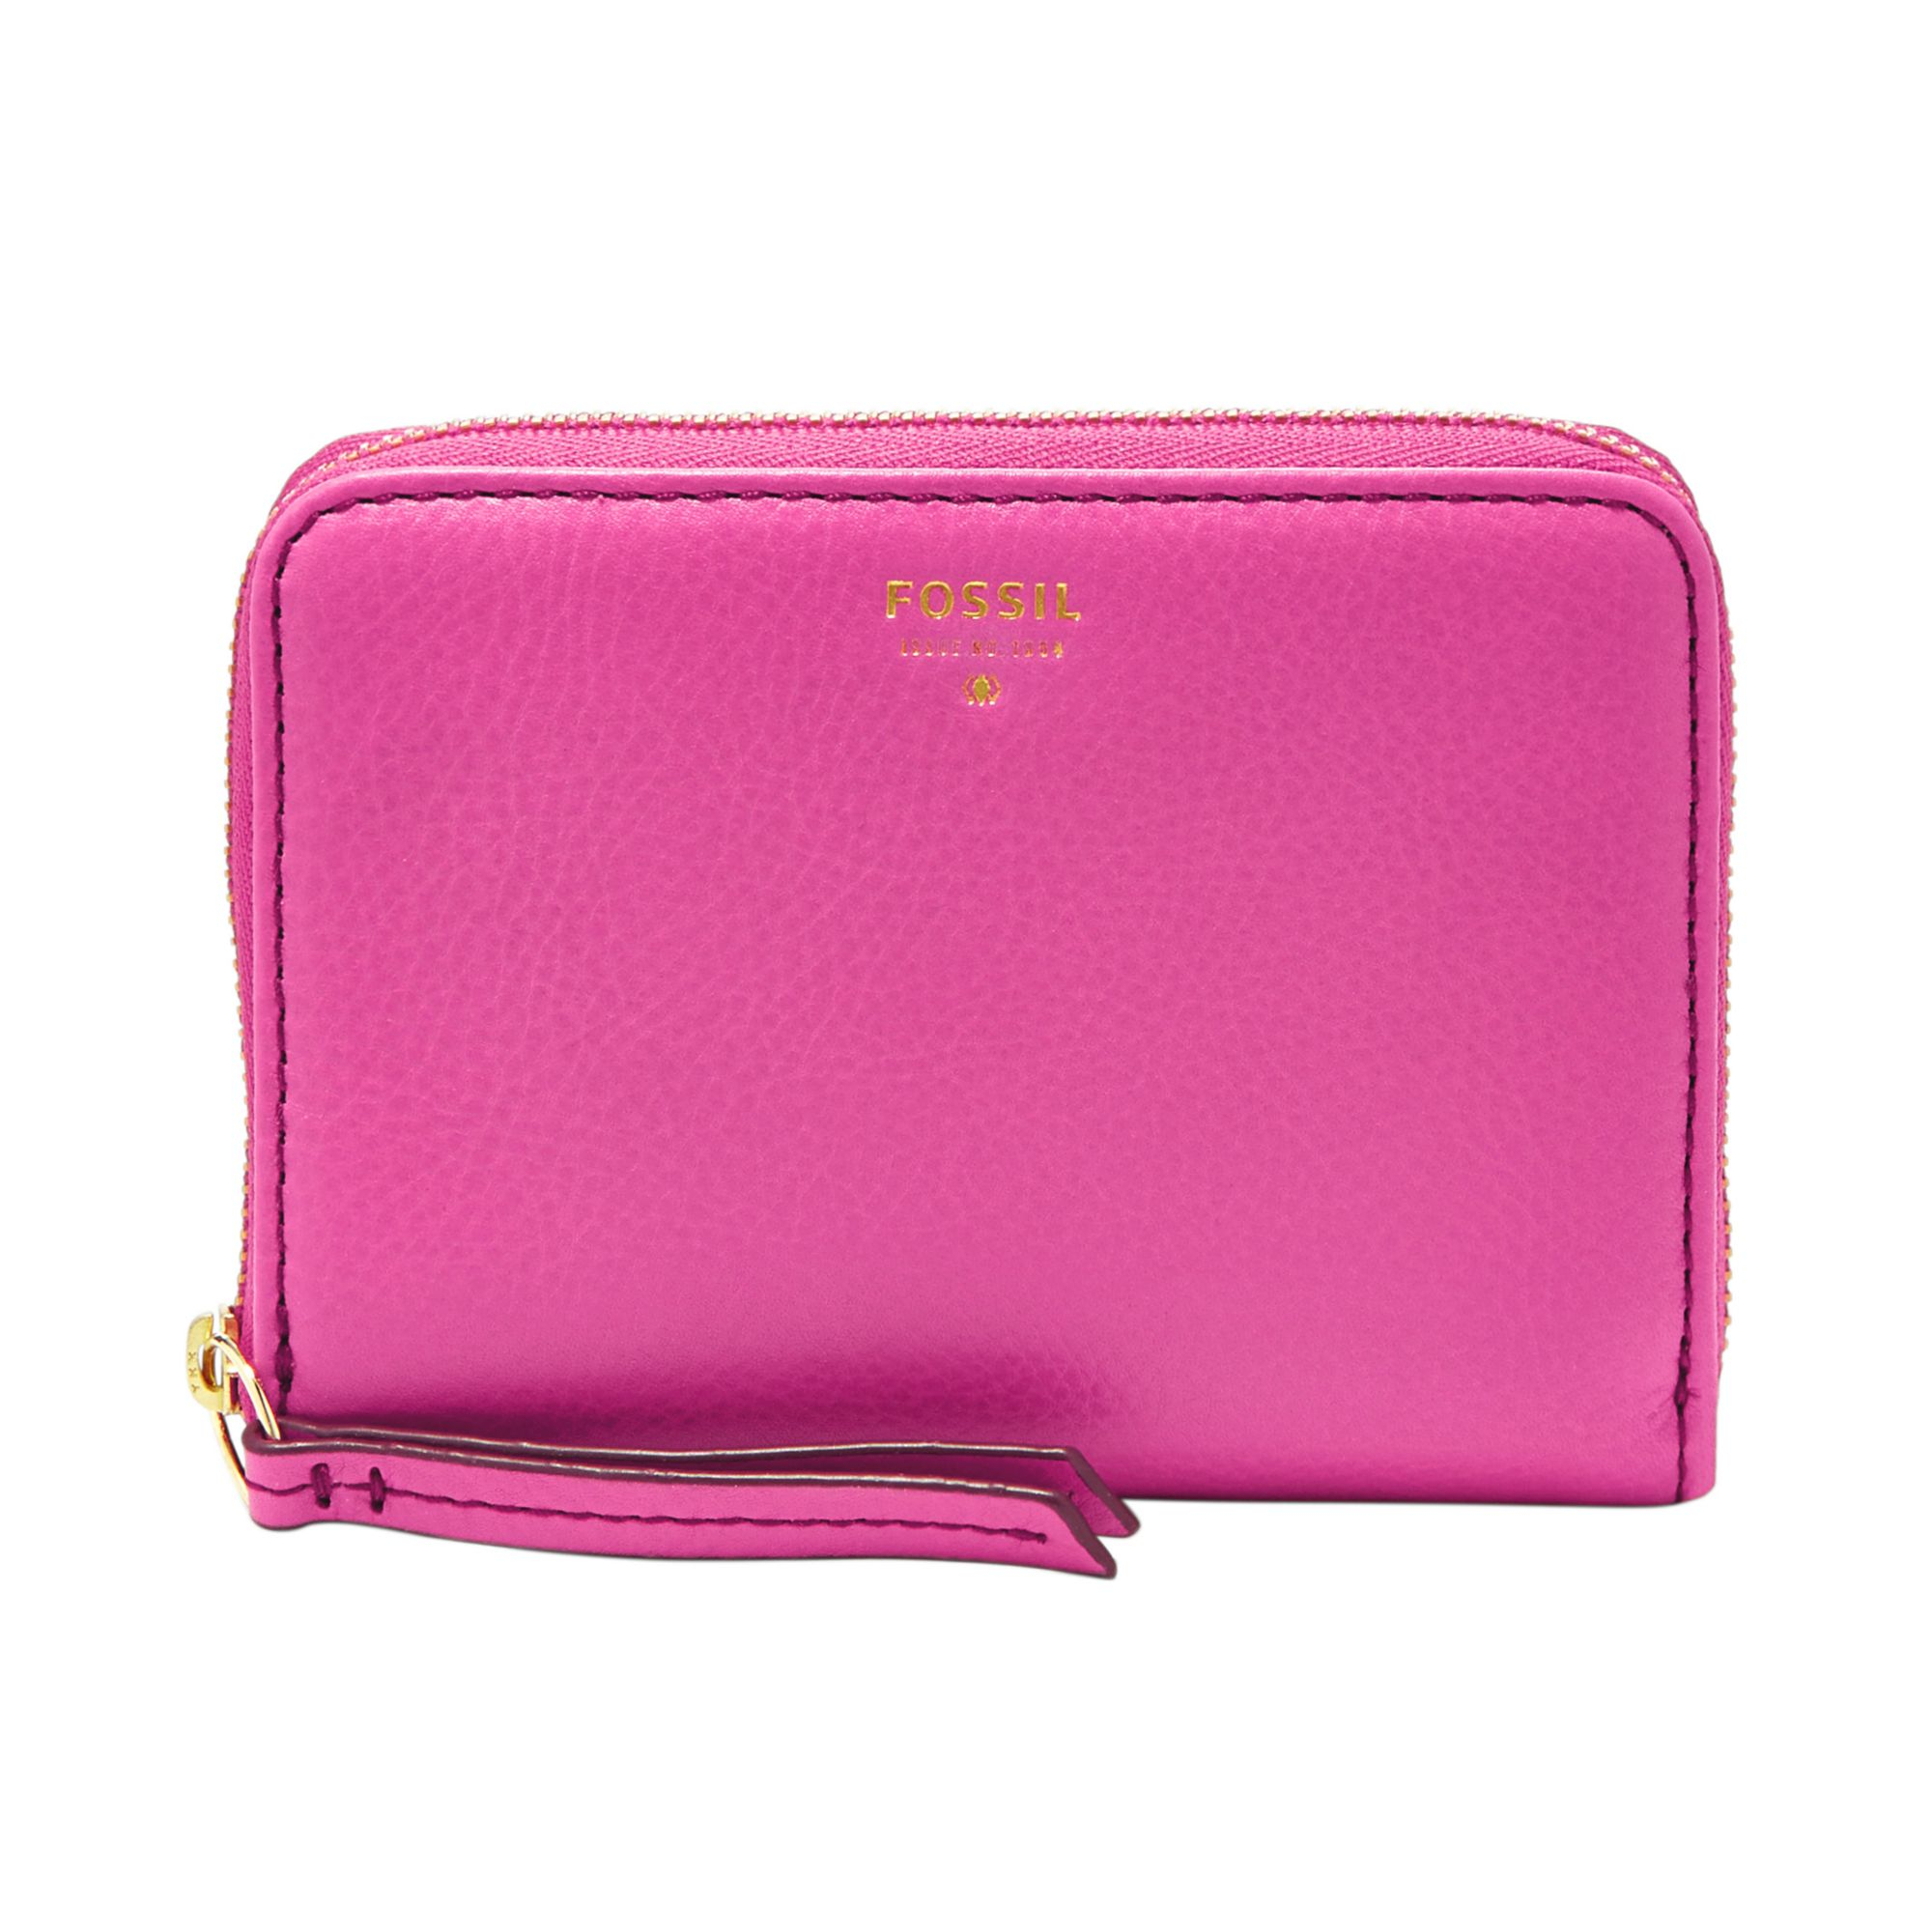 Fossil Sydney Zip Multi Function Wallet in Pink (BRIGHT PINK) | Lyst